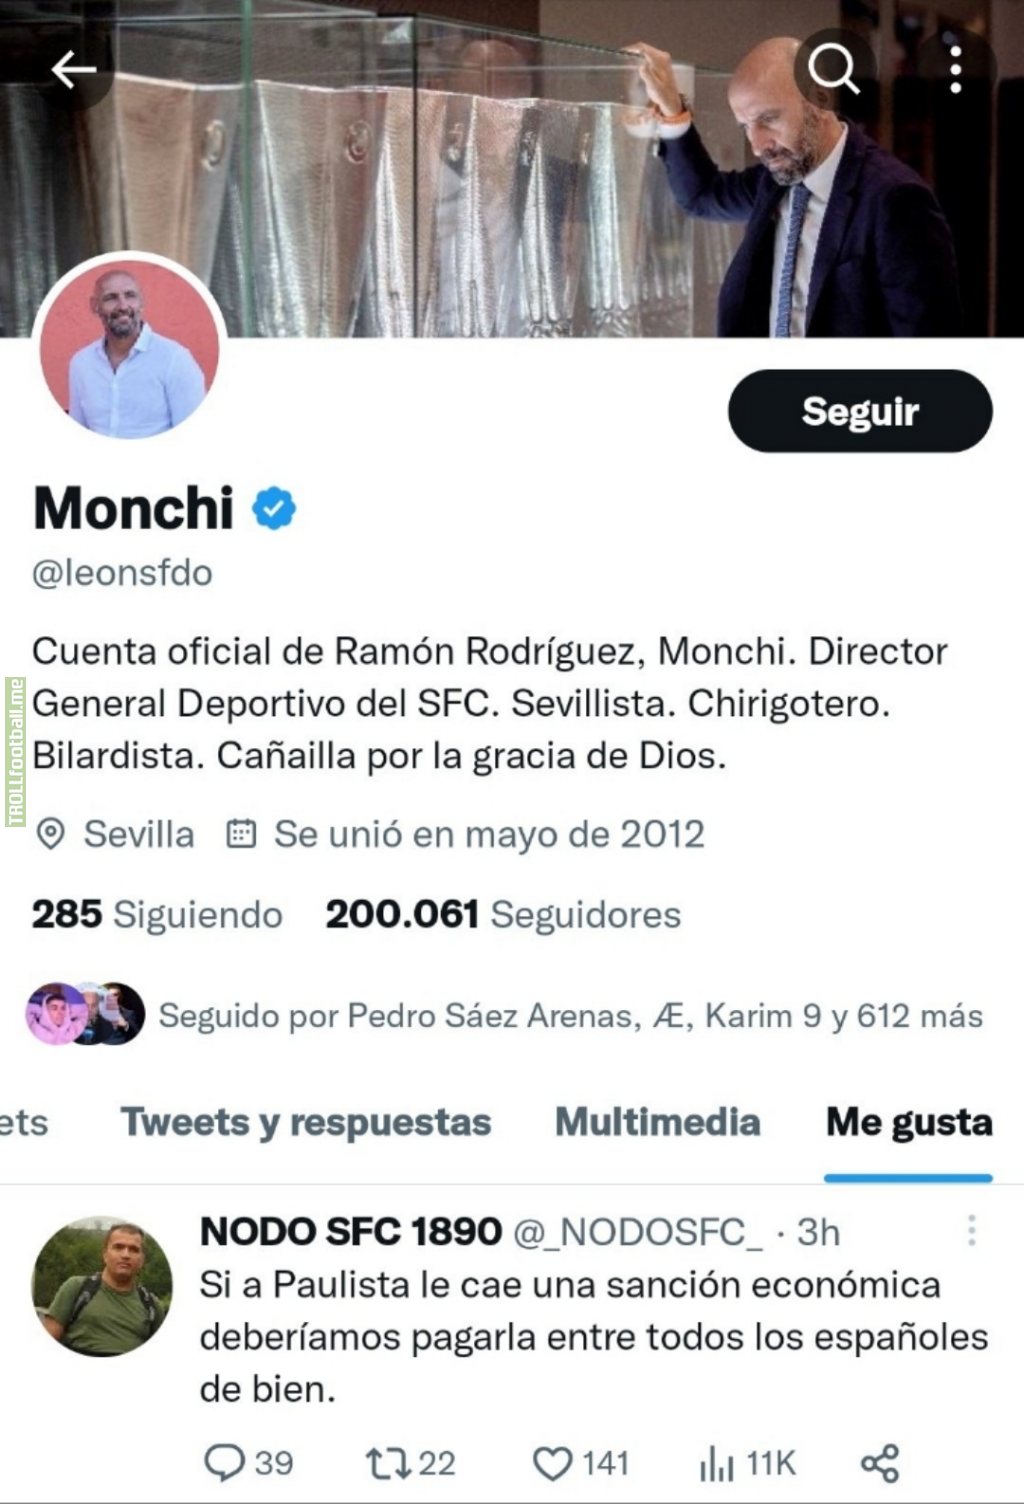 Sevilla sporting director Monchi likes a tweet saying: "If Paulista gets an economic sanction, we should split the bill between all good Spaniards."